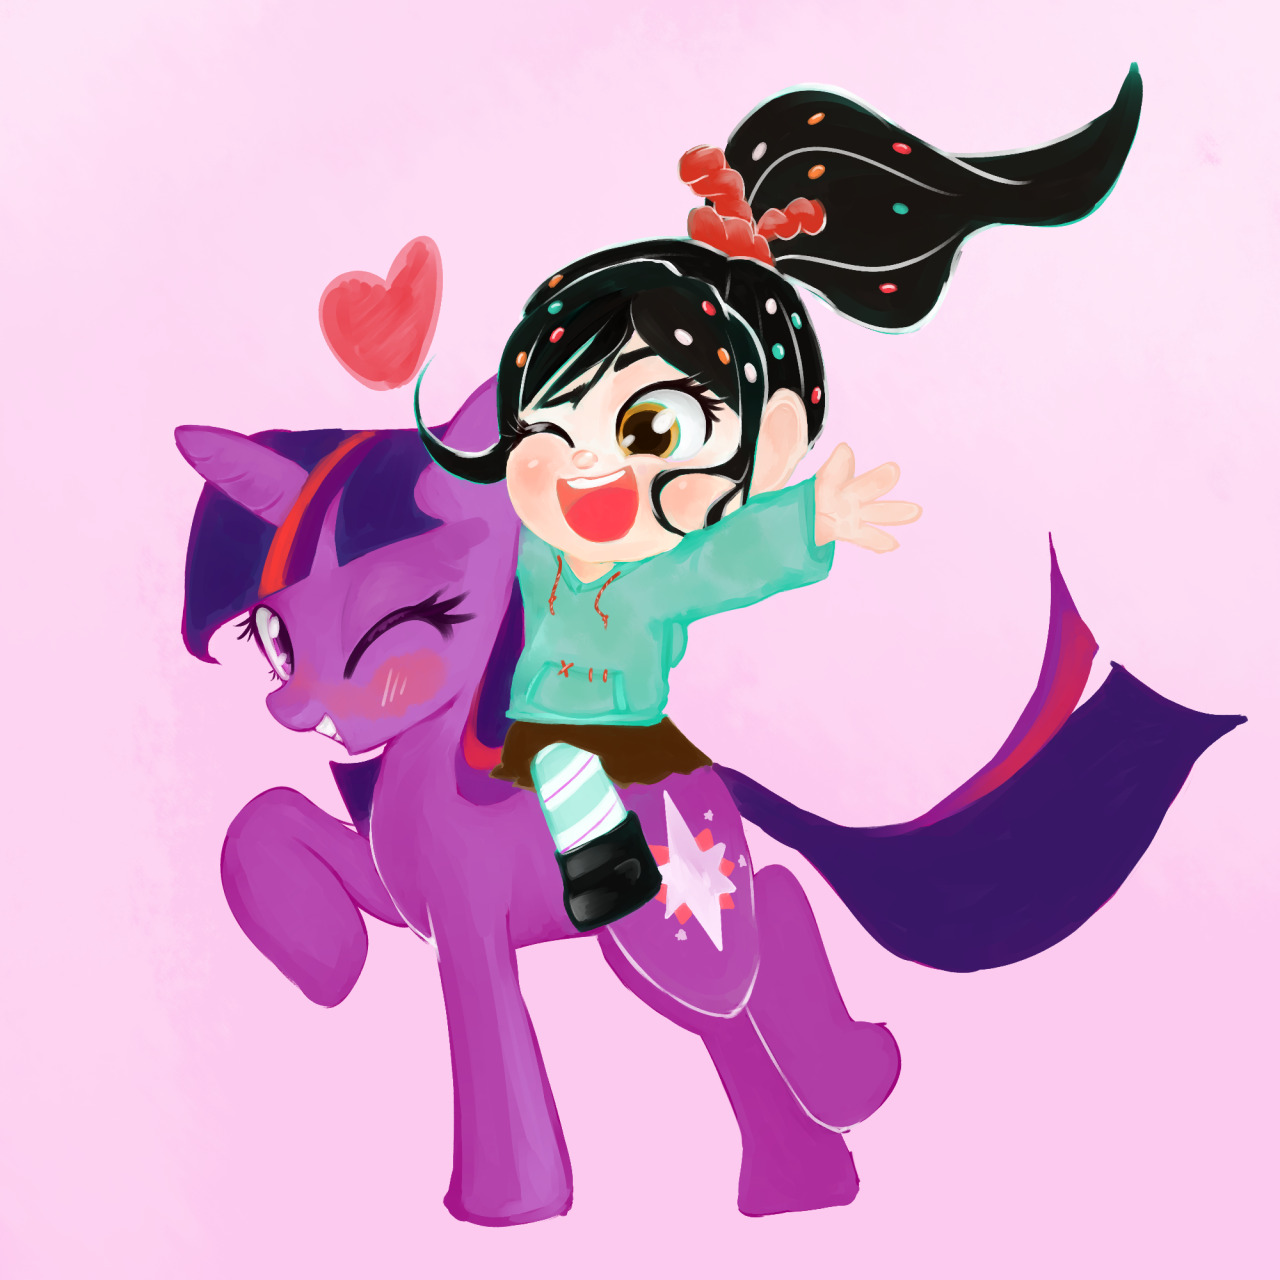 Drawings Cute Porn - saved â€” ponylicking: I can't draw vanellope pornâ€¦ too...